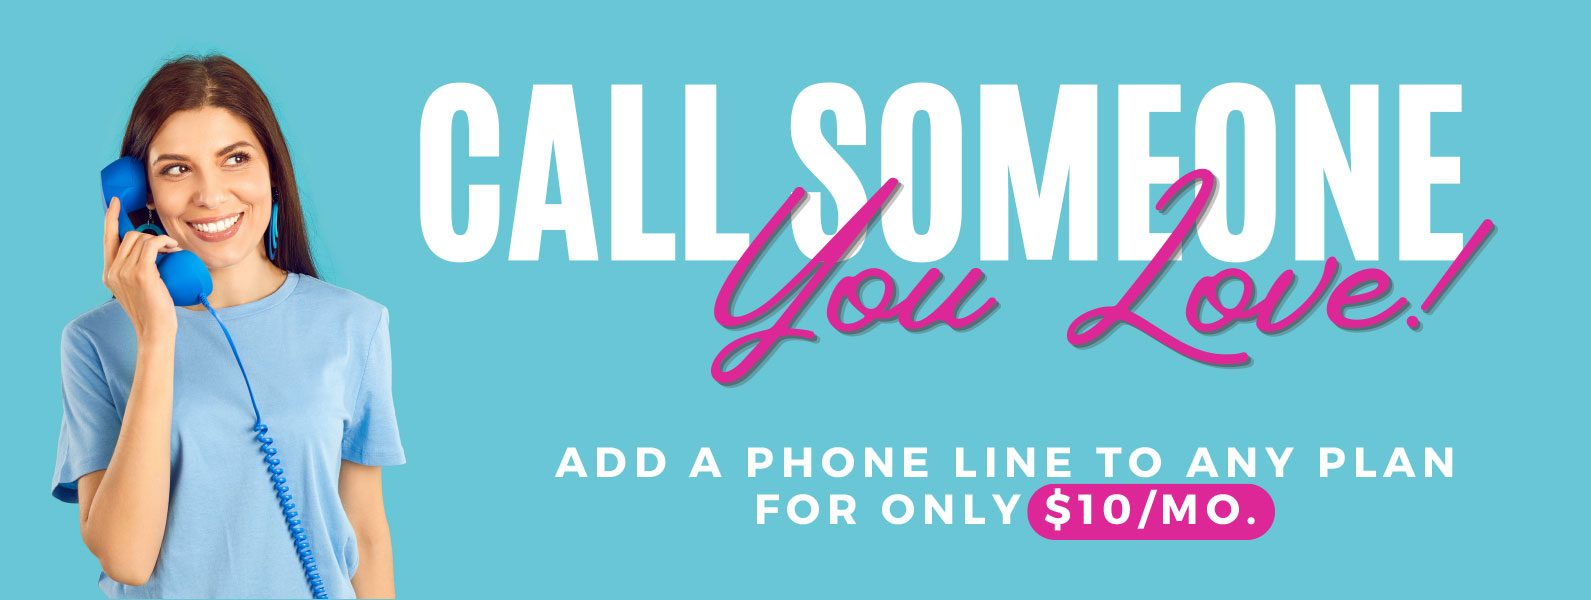 Call someone you love. Add a phone line to any plan for only $10/month.